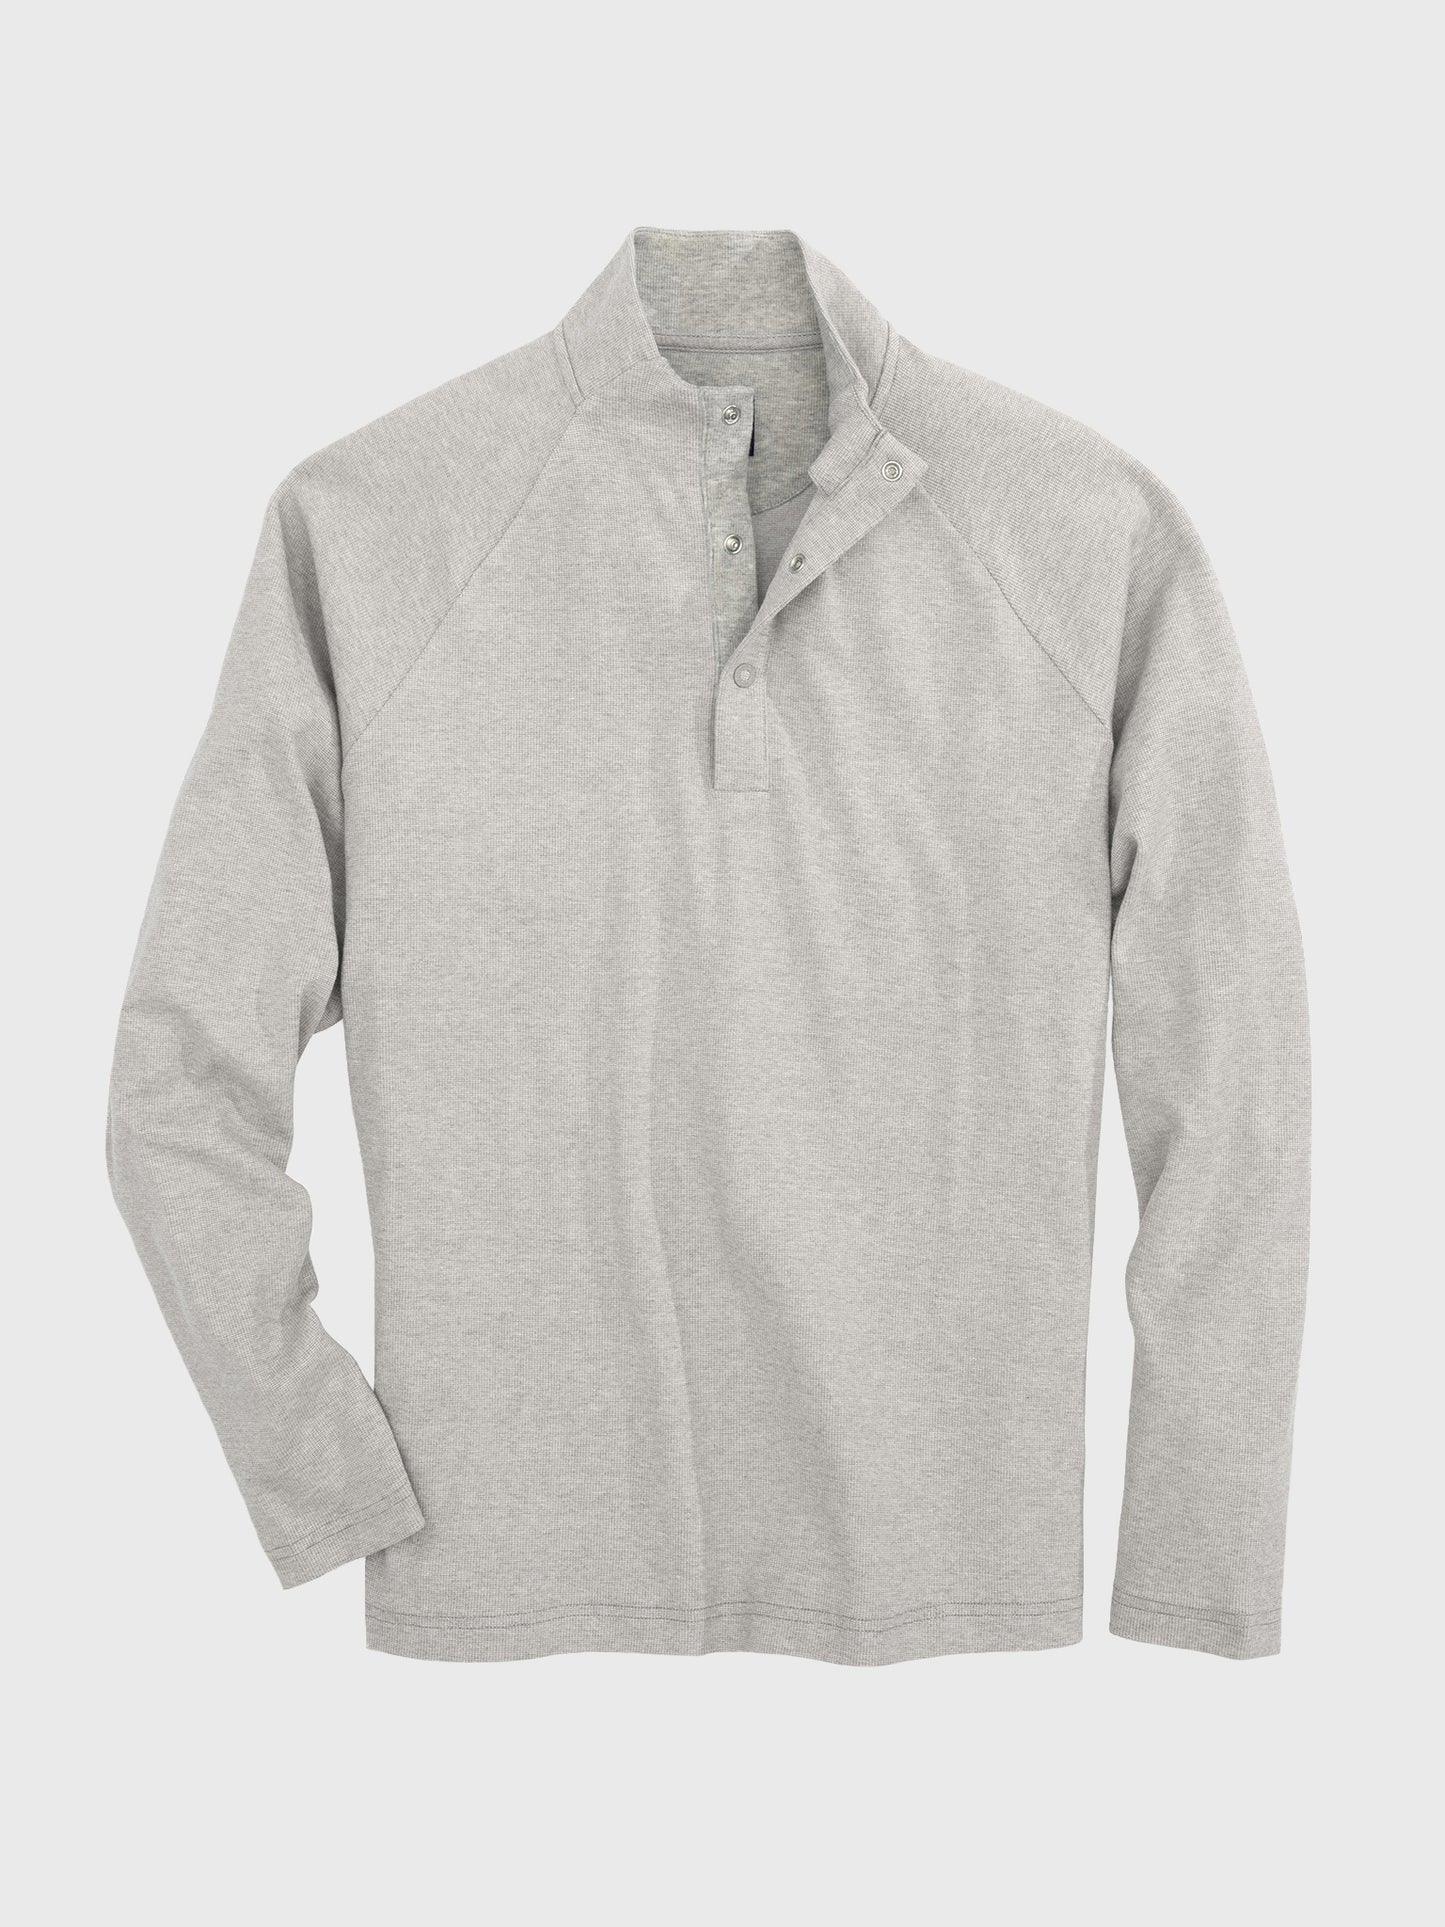 Johnnie-O Men's Whaling Light Henley Pullover Sweater